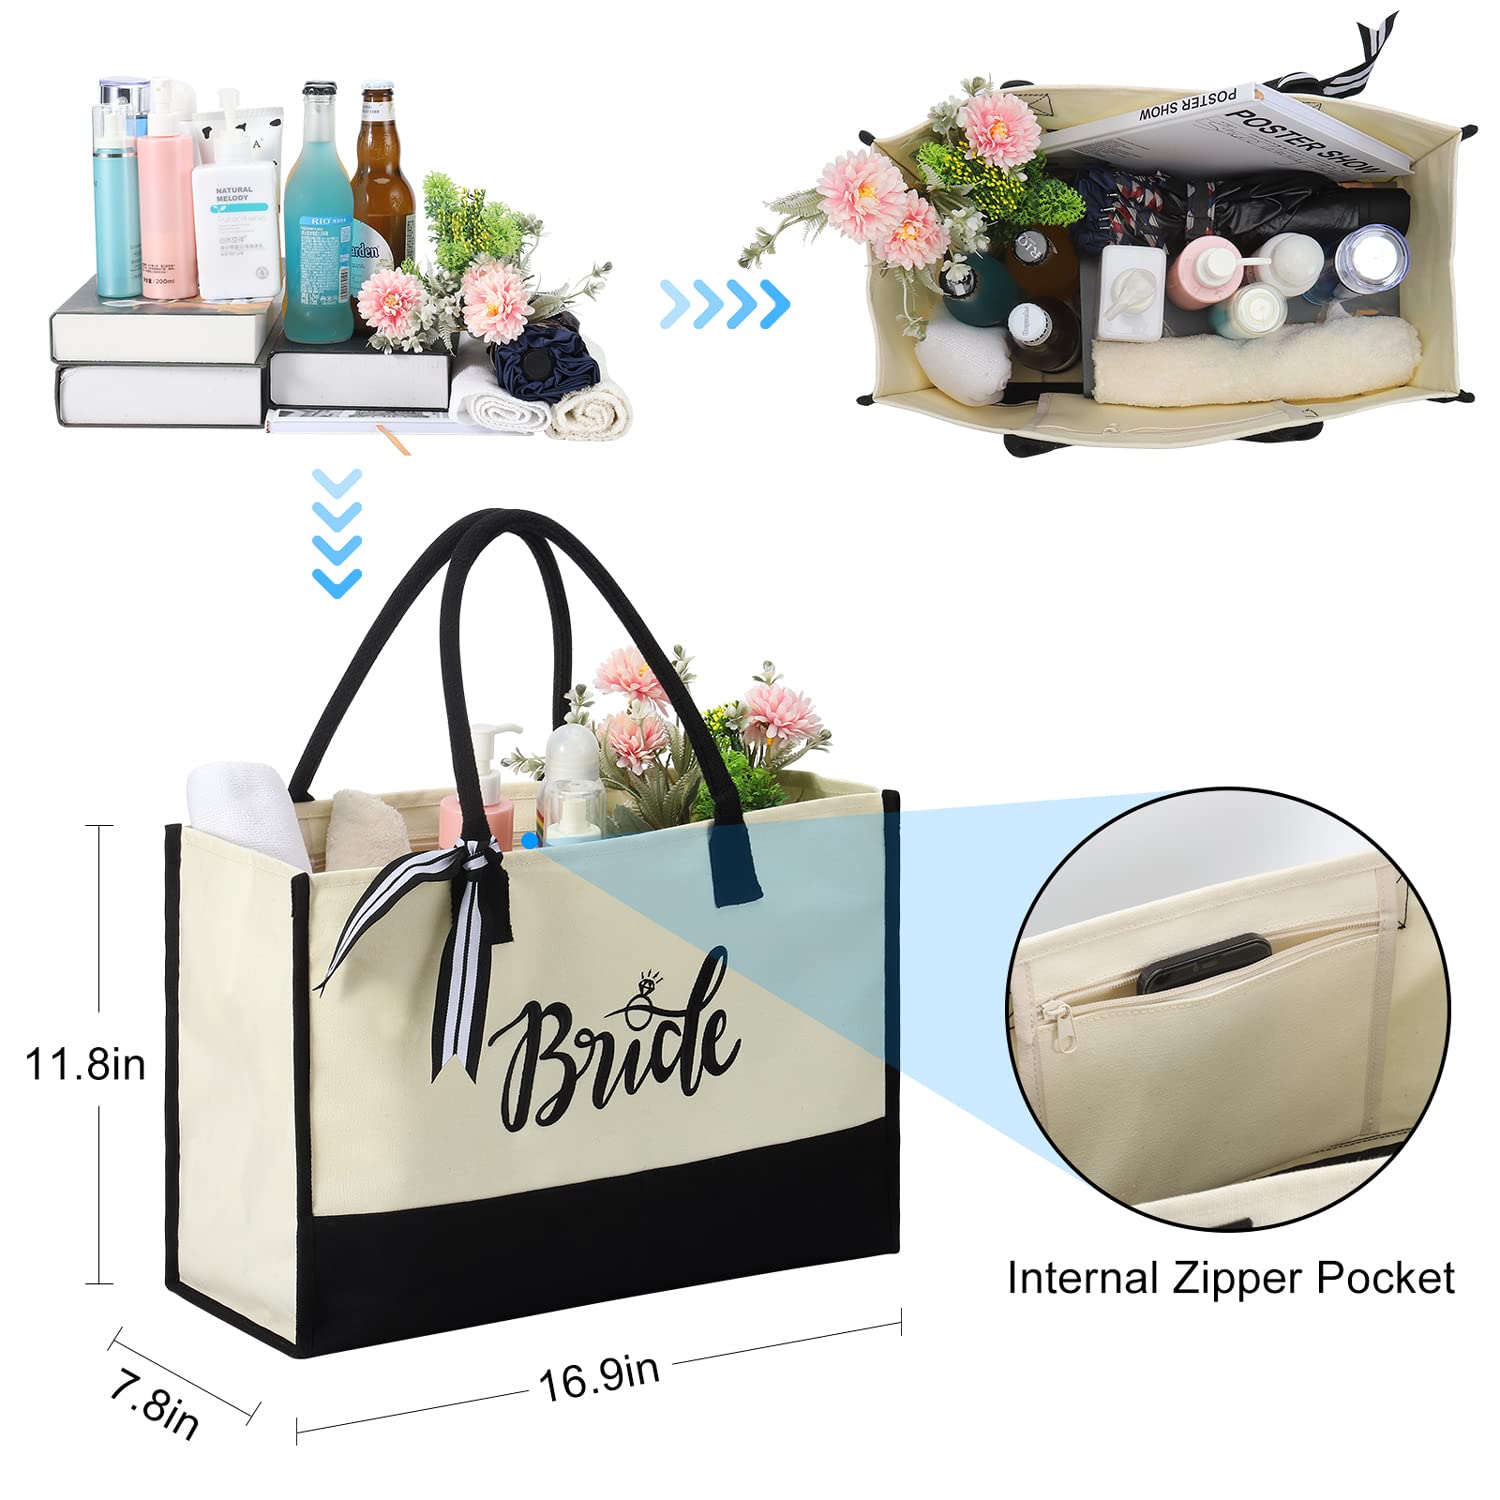 Bride Tote Bag Bridal Shower Gifts Embroidered Canvas Personalized Bridal Bag Engagment Wedding Honeymoon Gifts for Bride at Bachelorette Party Gift for Friend Trip Handbag with Internal Zipper Pocket